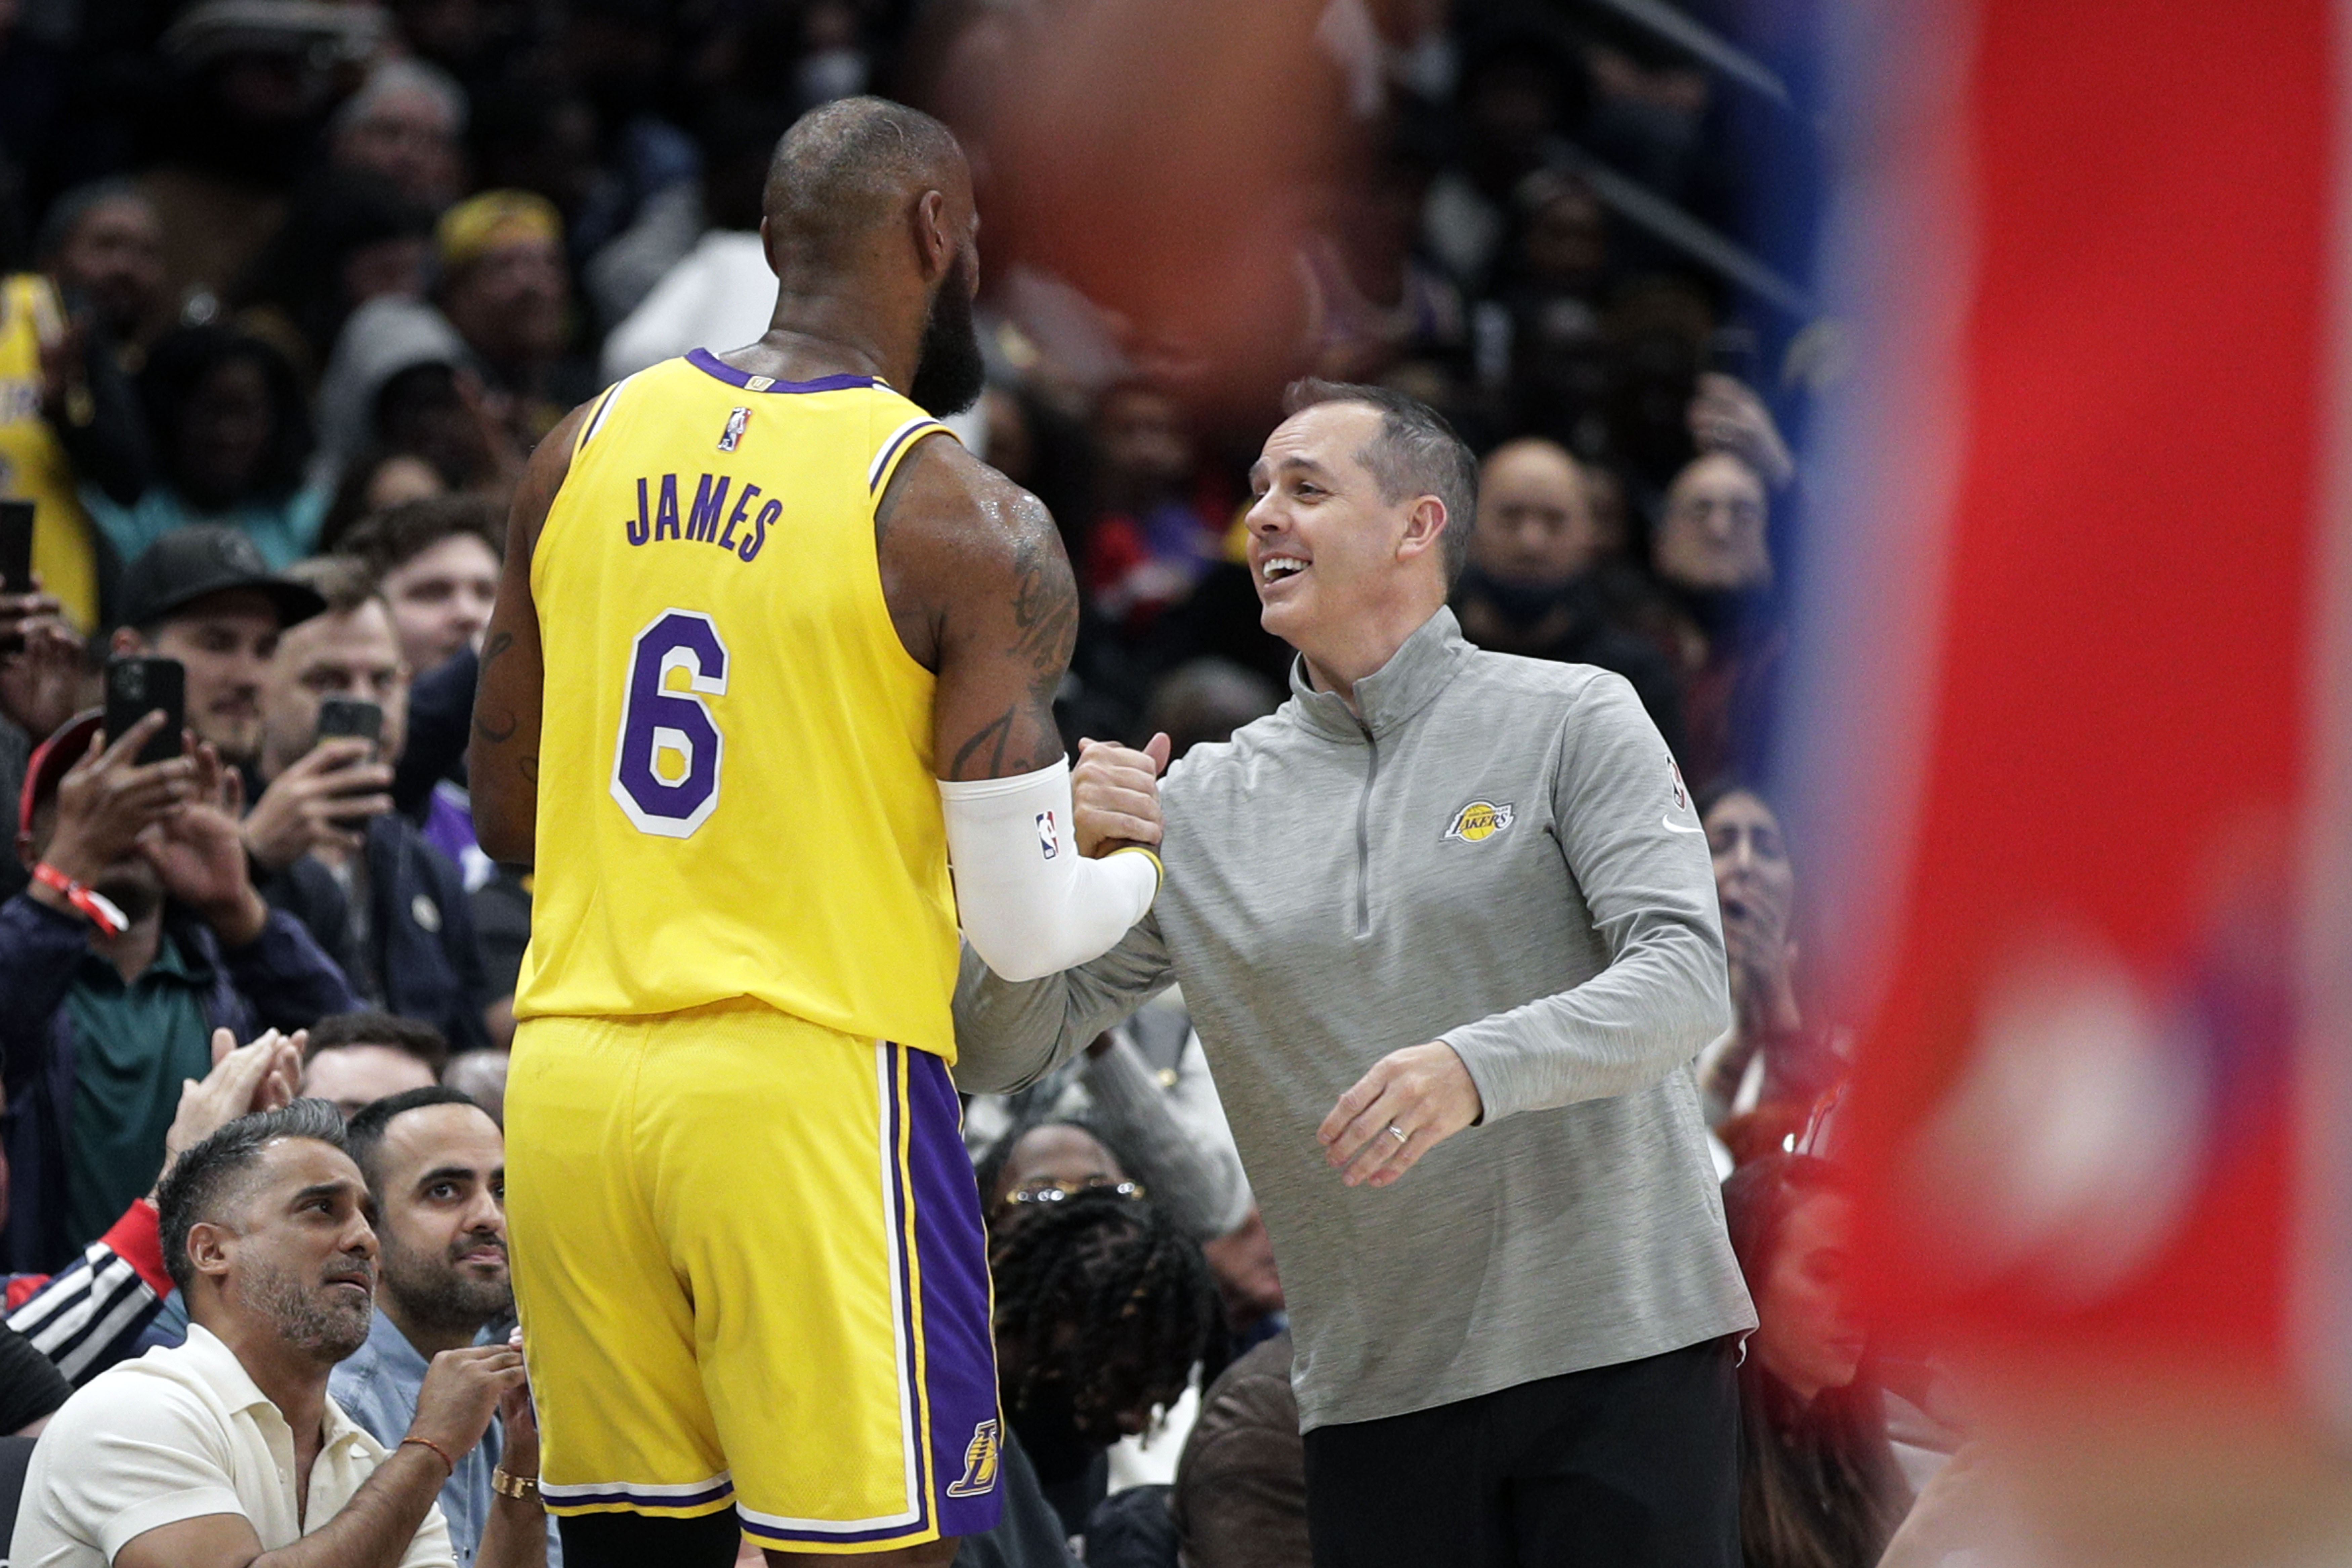 NBA 2022: LeBron James all-time points scoring record, Los Angeles Lakers  vs Washington Wizards, Russell Westbrook, Jerami Grant, scores